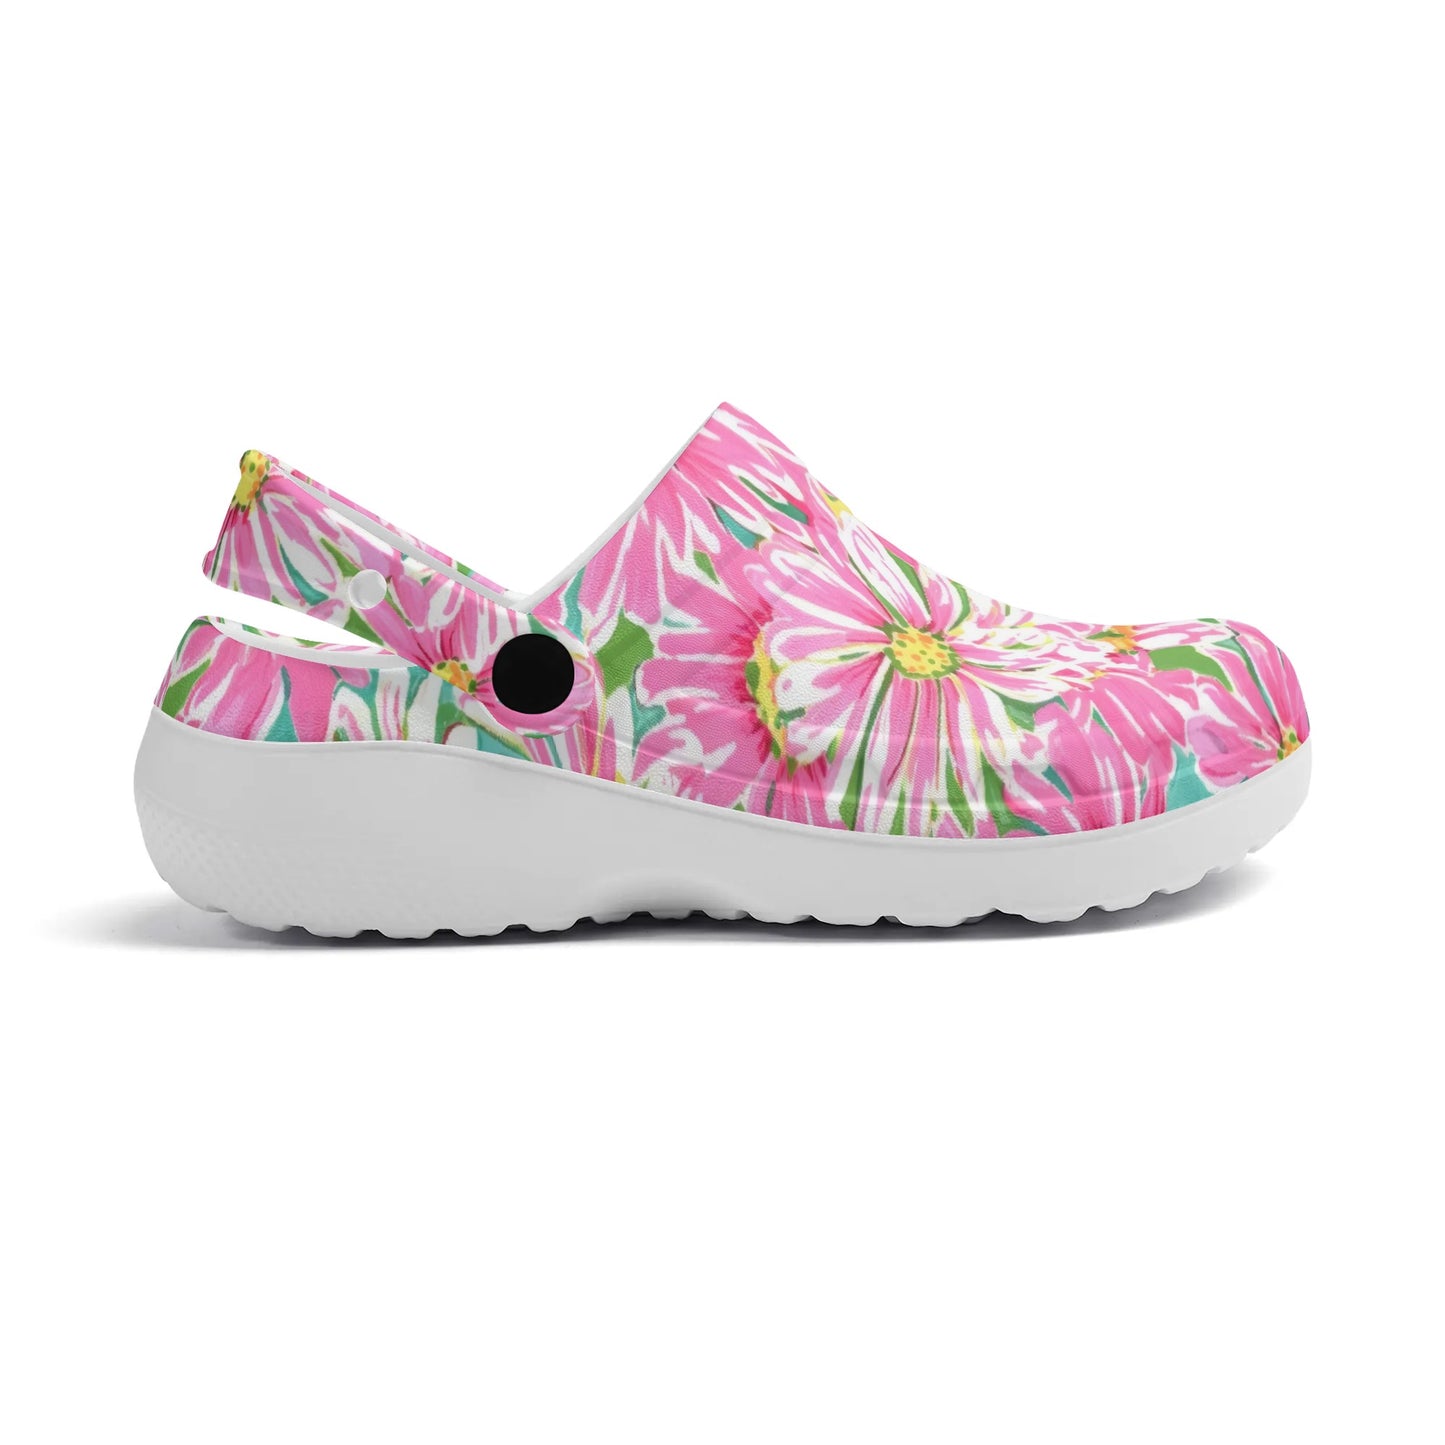 Springs Whisper: Watercolor Pink Daisies Dancing on a Lush Green Stage Casual Lightweight Slip On Nurse Style Clogs